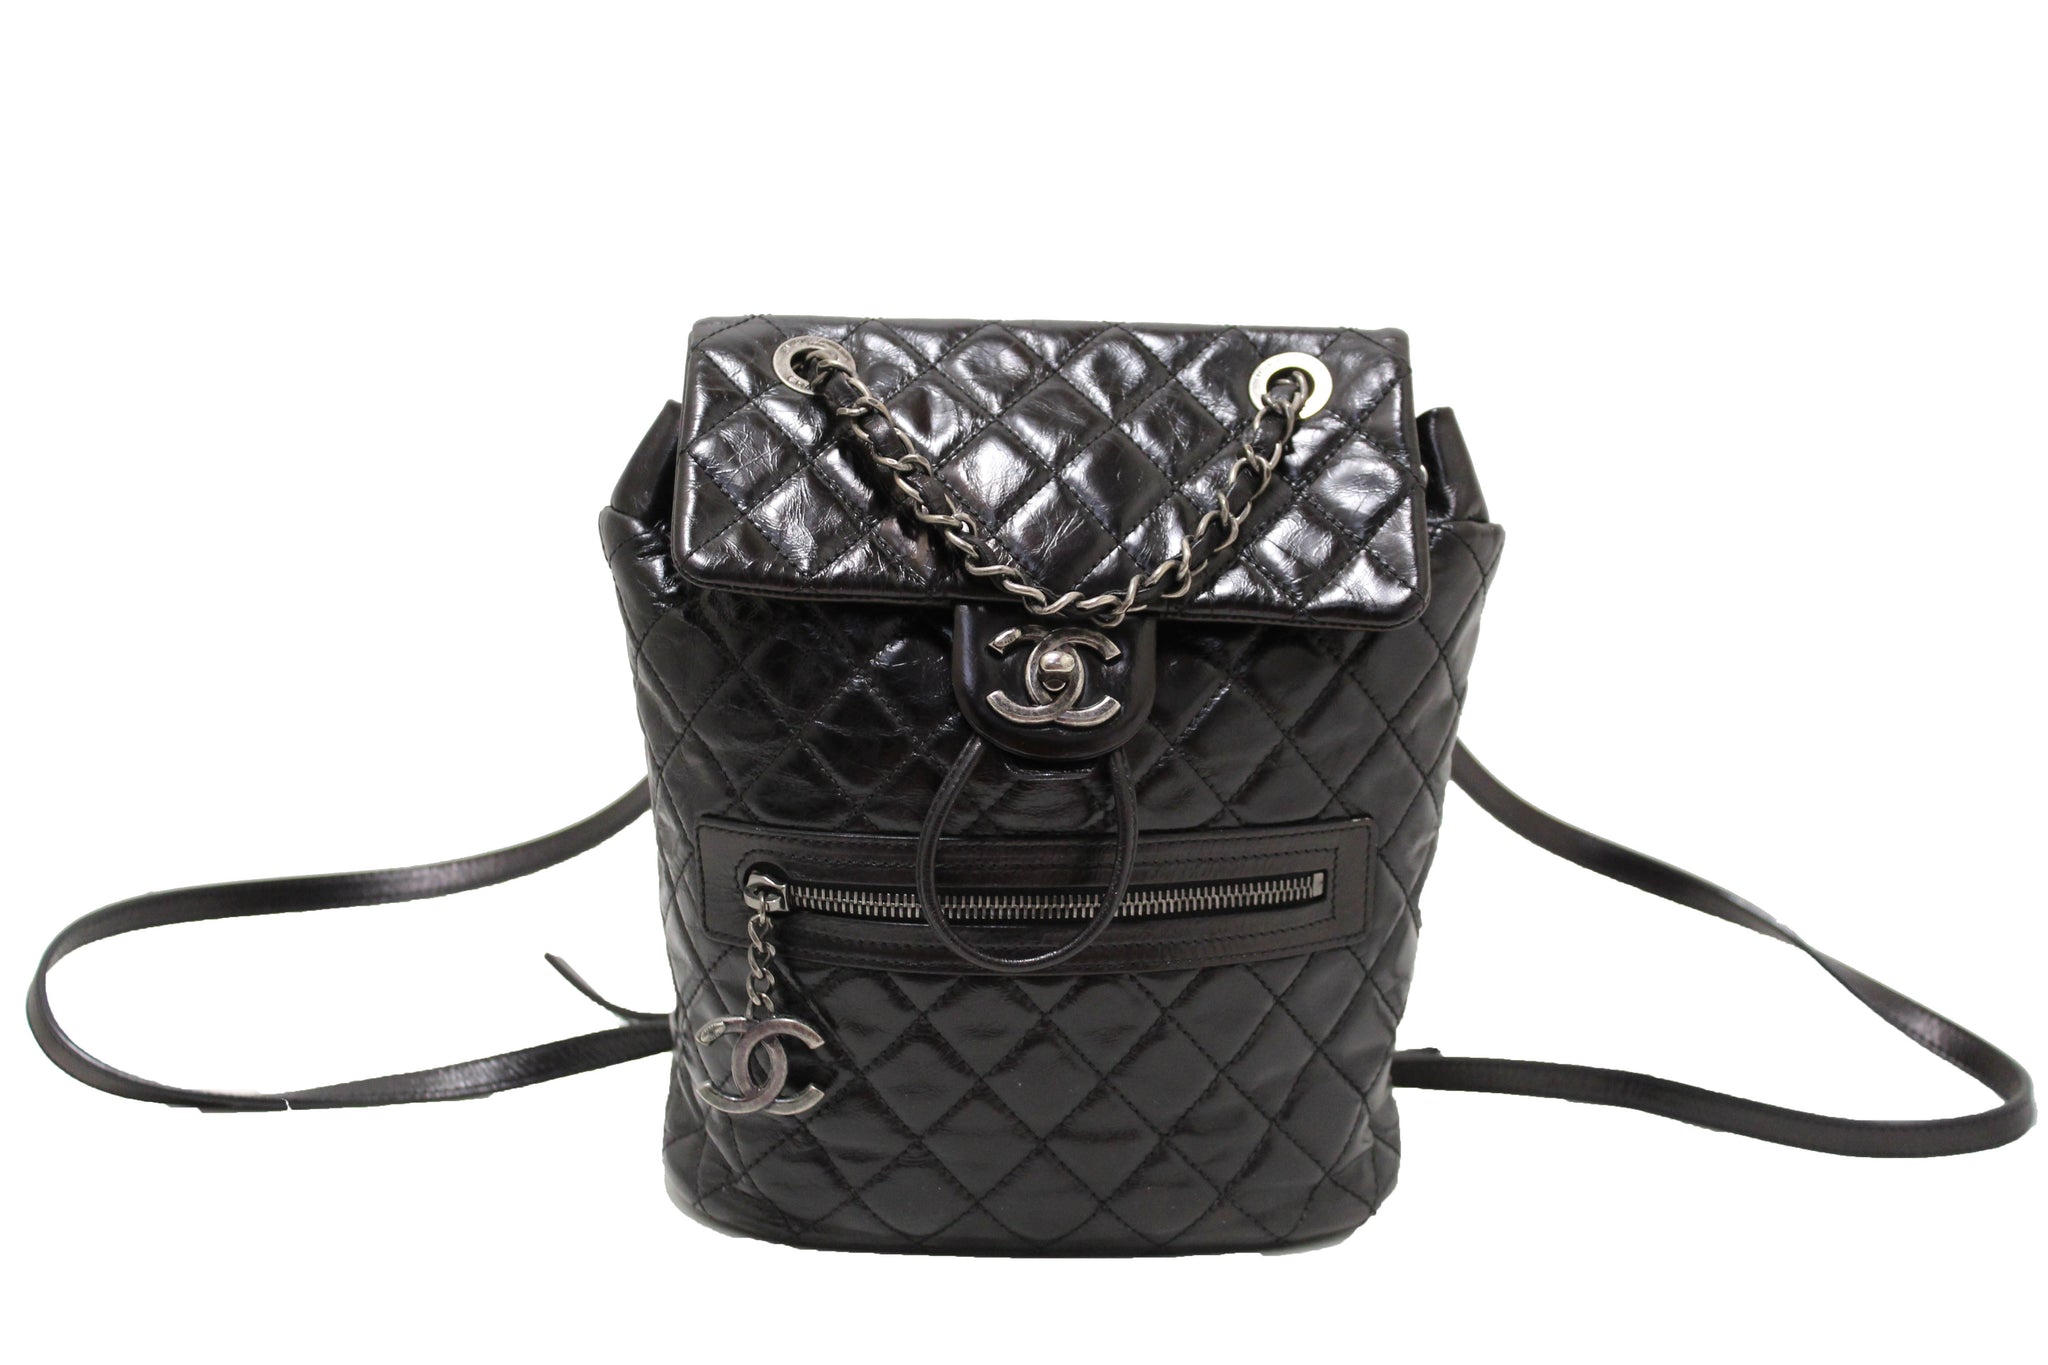 Chanel Black Quilted Calfskin Leather Small Salzburg Mountain